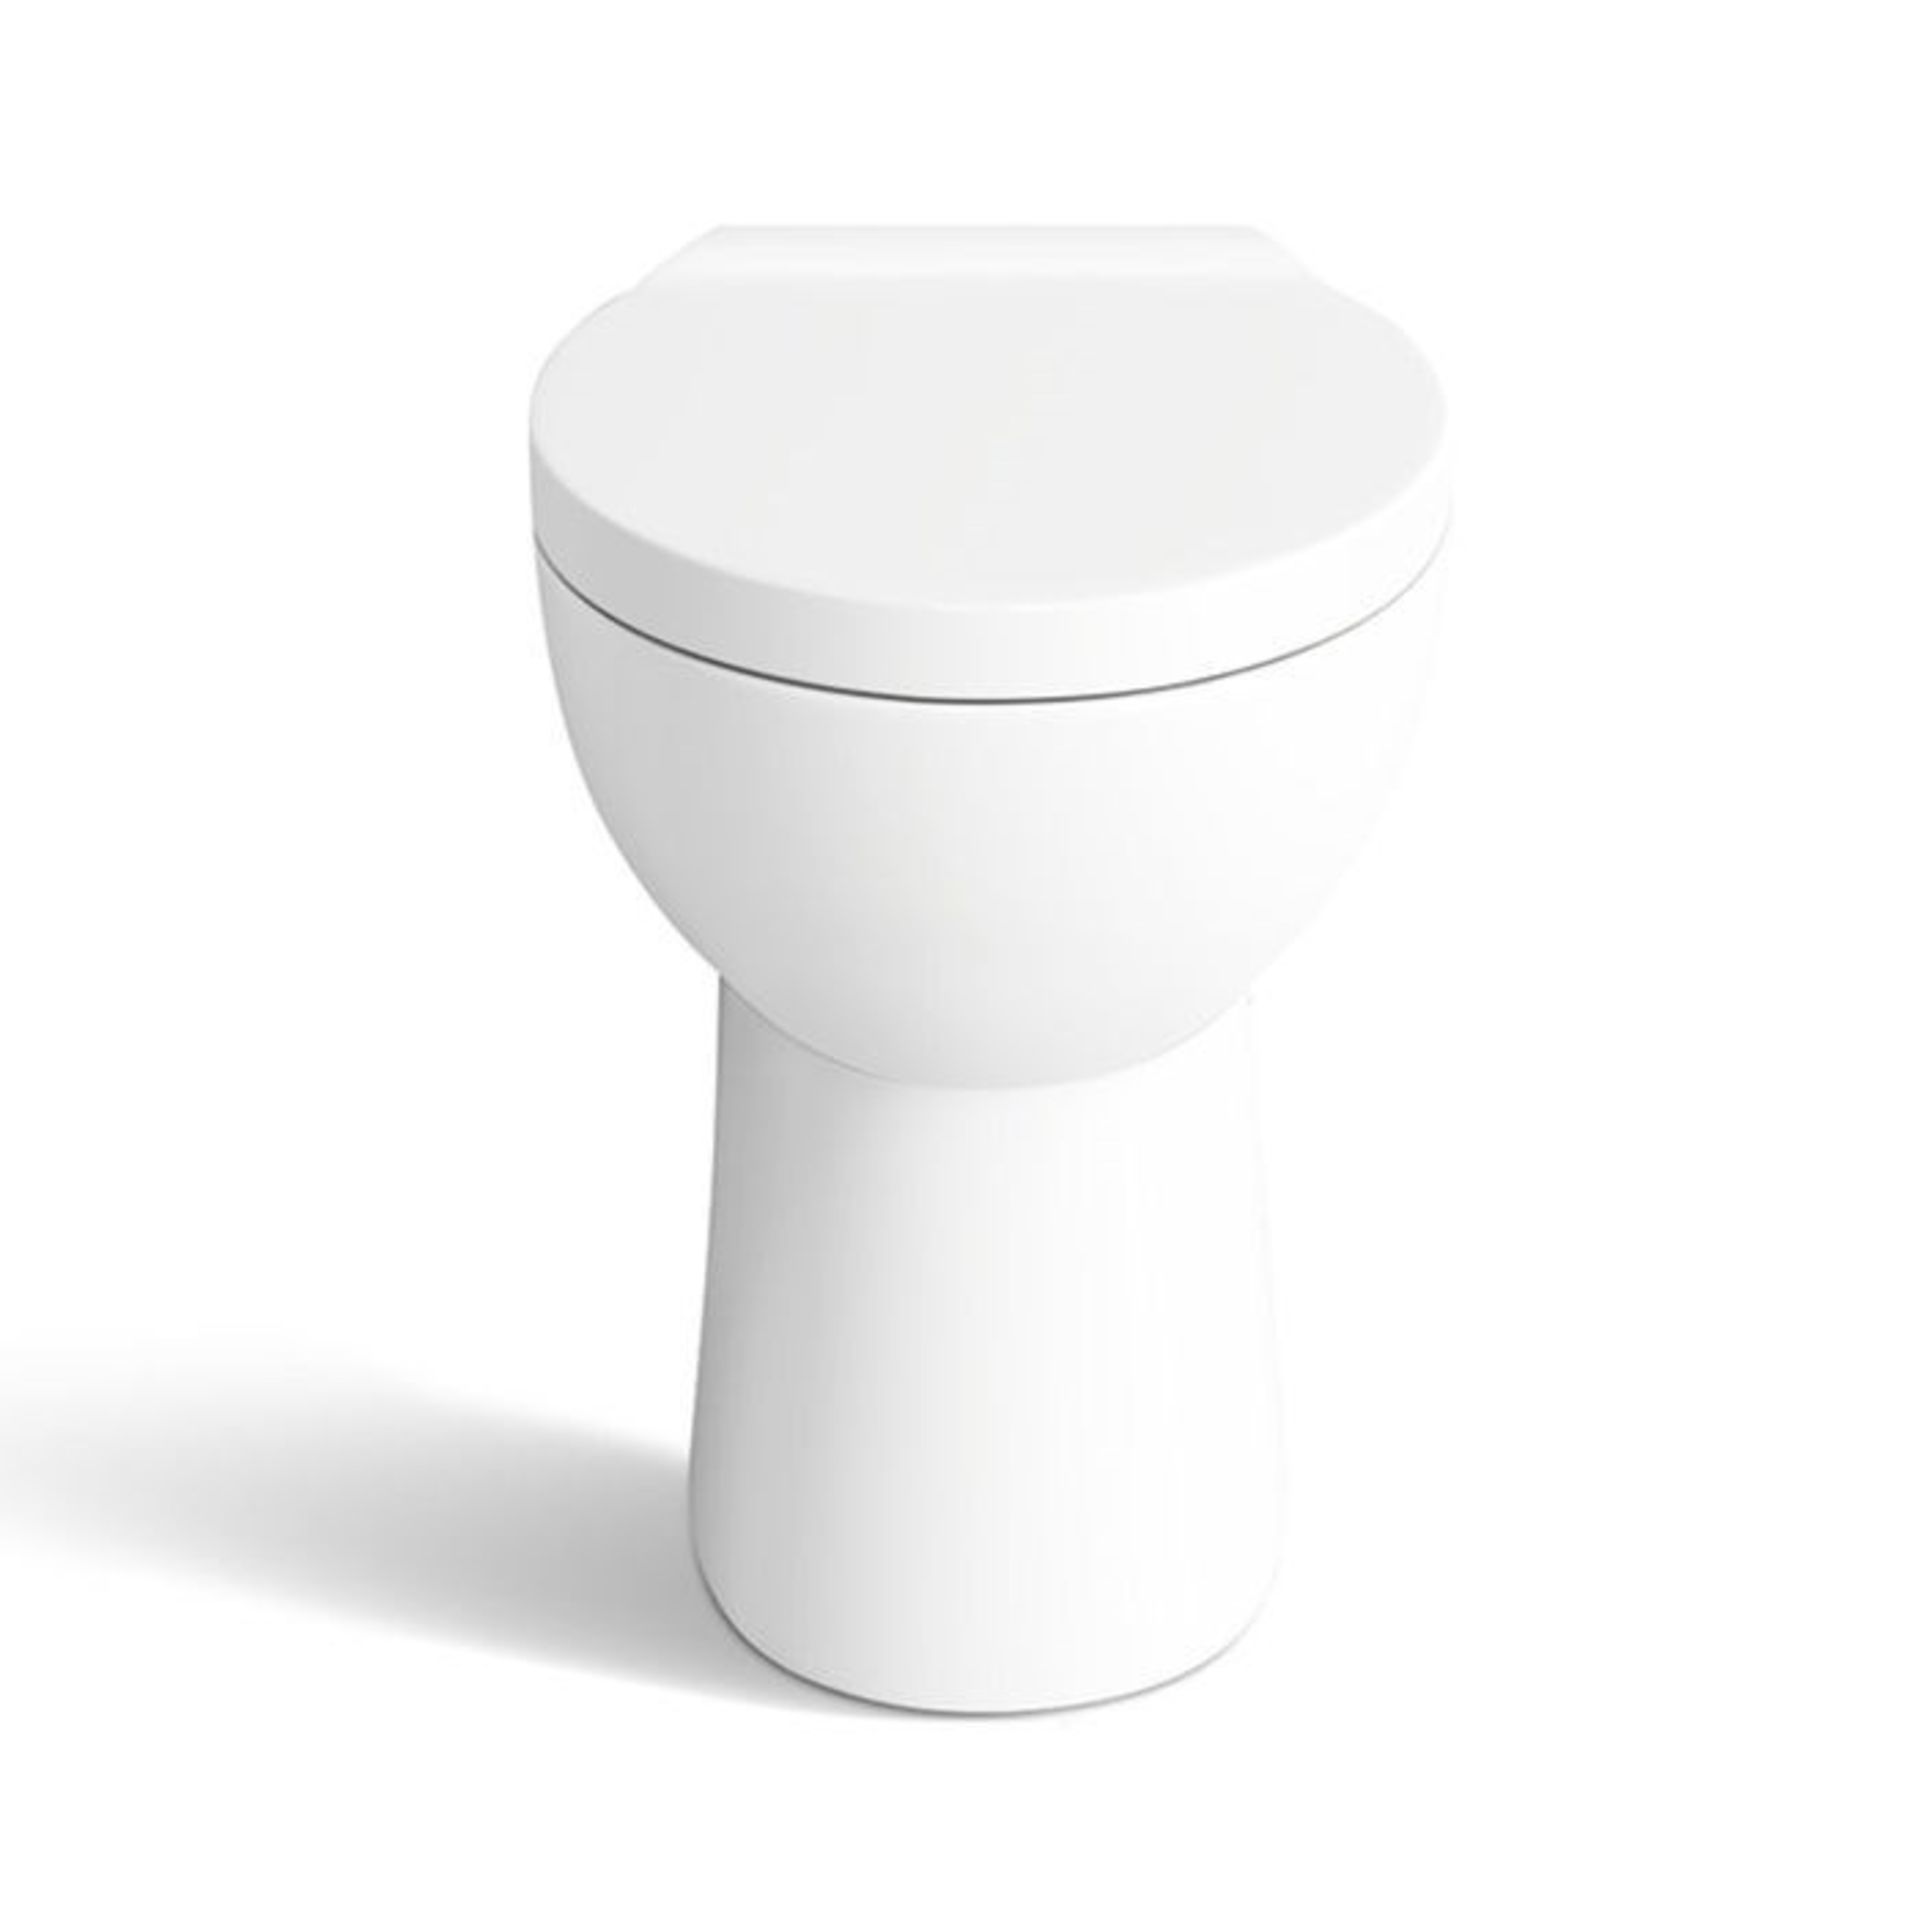 Back to Wall Toilet & Soft Close Seat. Stylish design Made from White Vitreous China Finished ... - Image 2 of 2